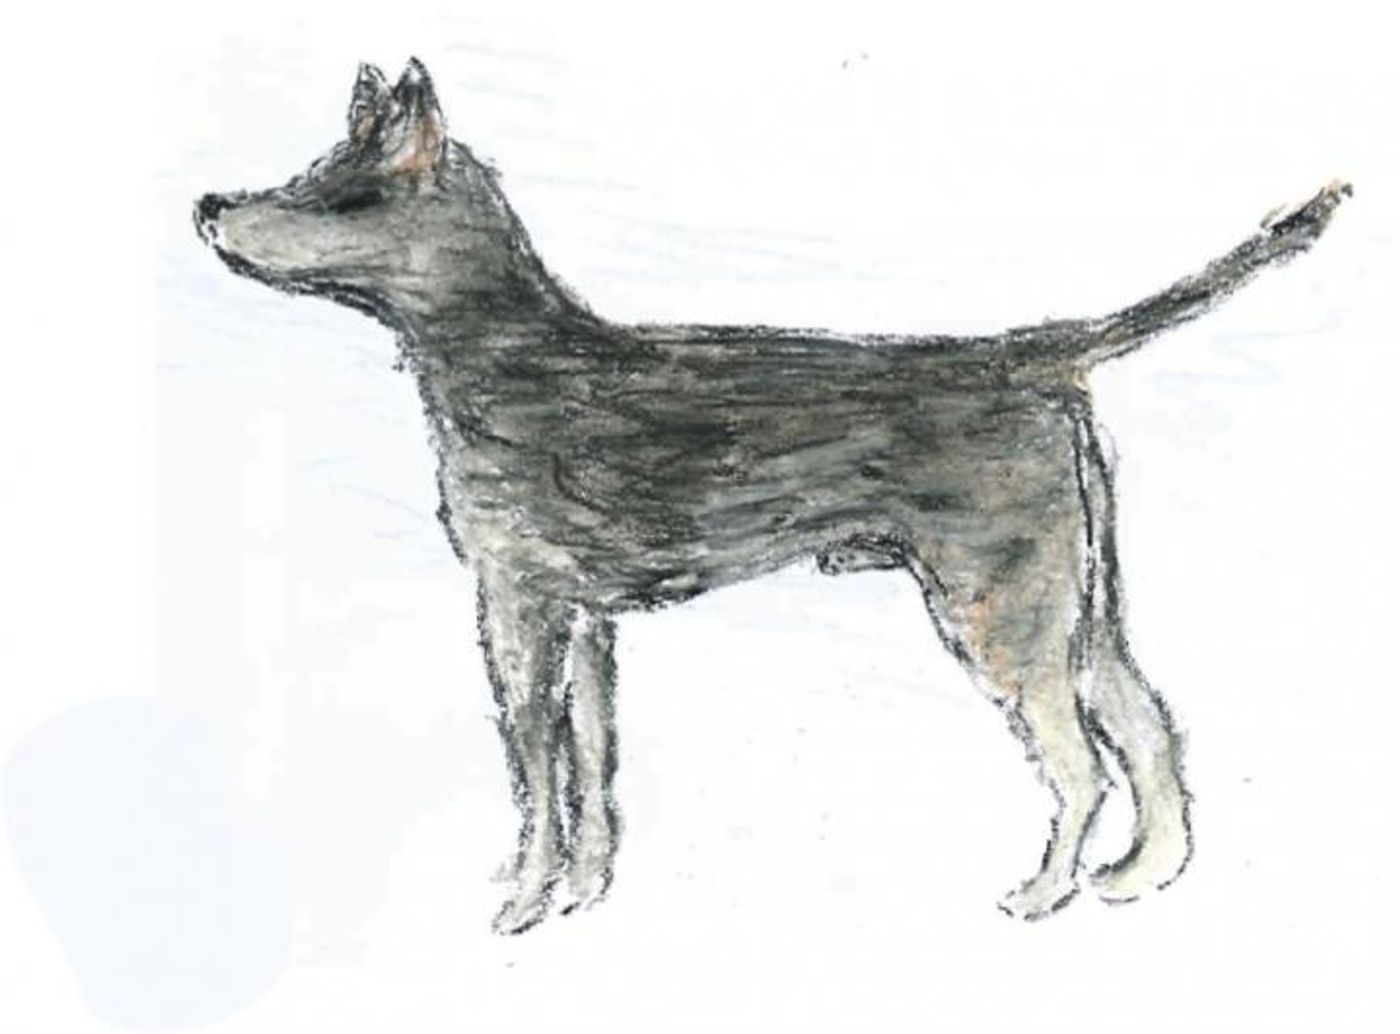 Artist's impression of the 'founder dog' that first gave rise to CTVT. This dog's phenotypic traits were interpreted from the genetic variation found in the DNA of the cancer that it spawned. / Credit: Emma Werner